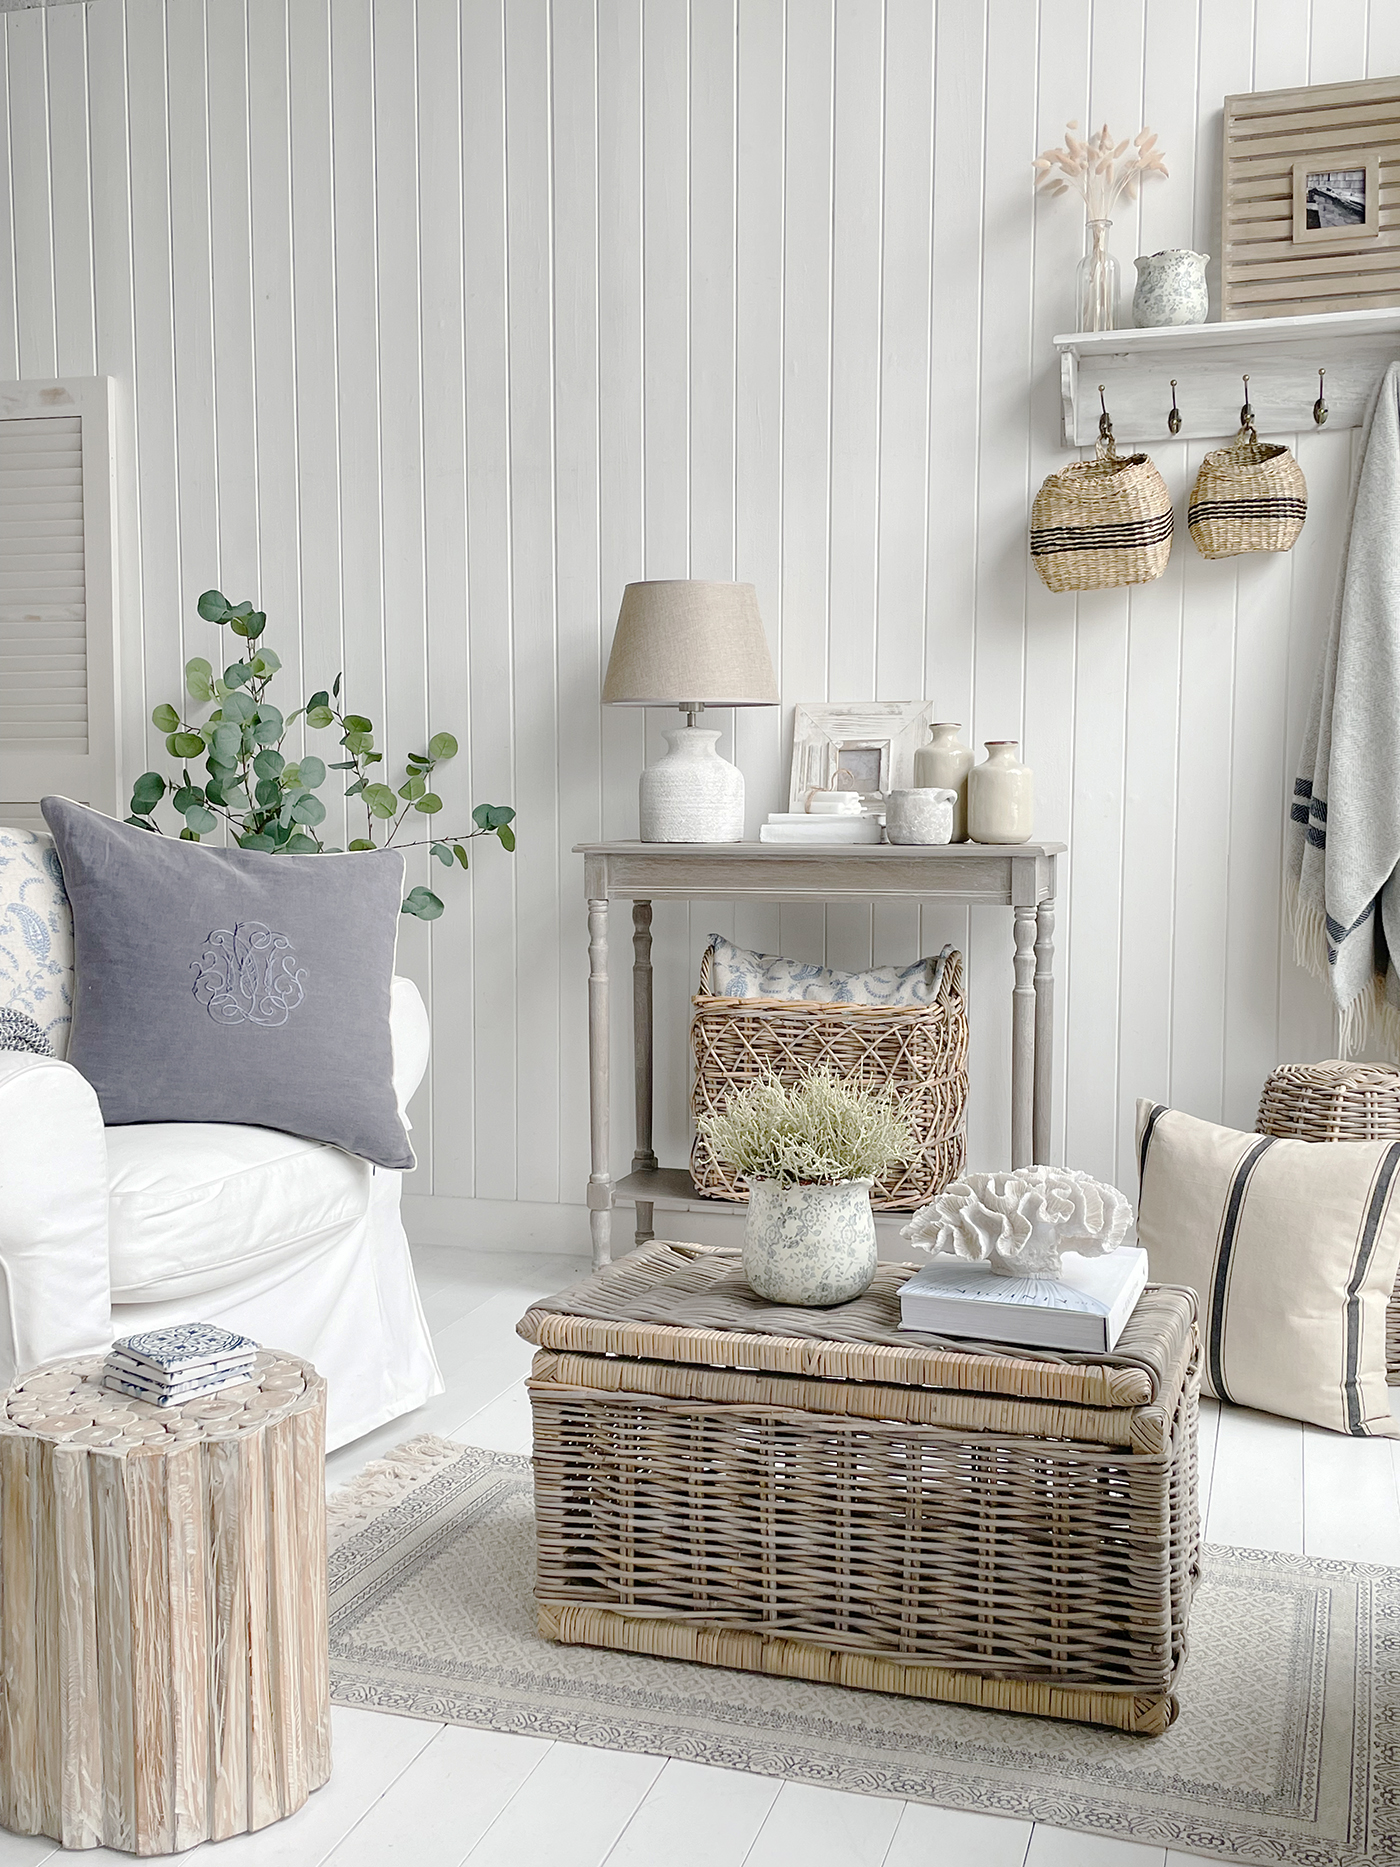 New England style living room with home decor for modern farmhouse and coastal styled homes and interiors